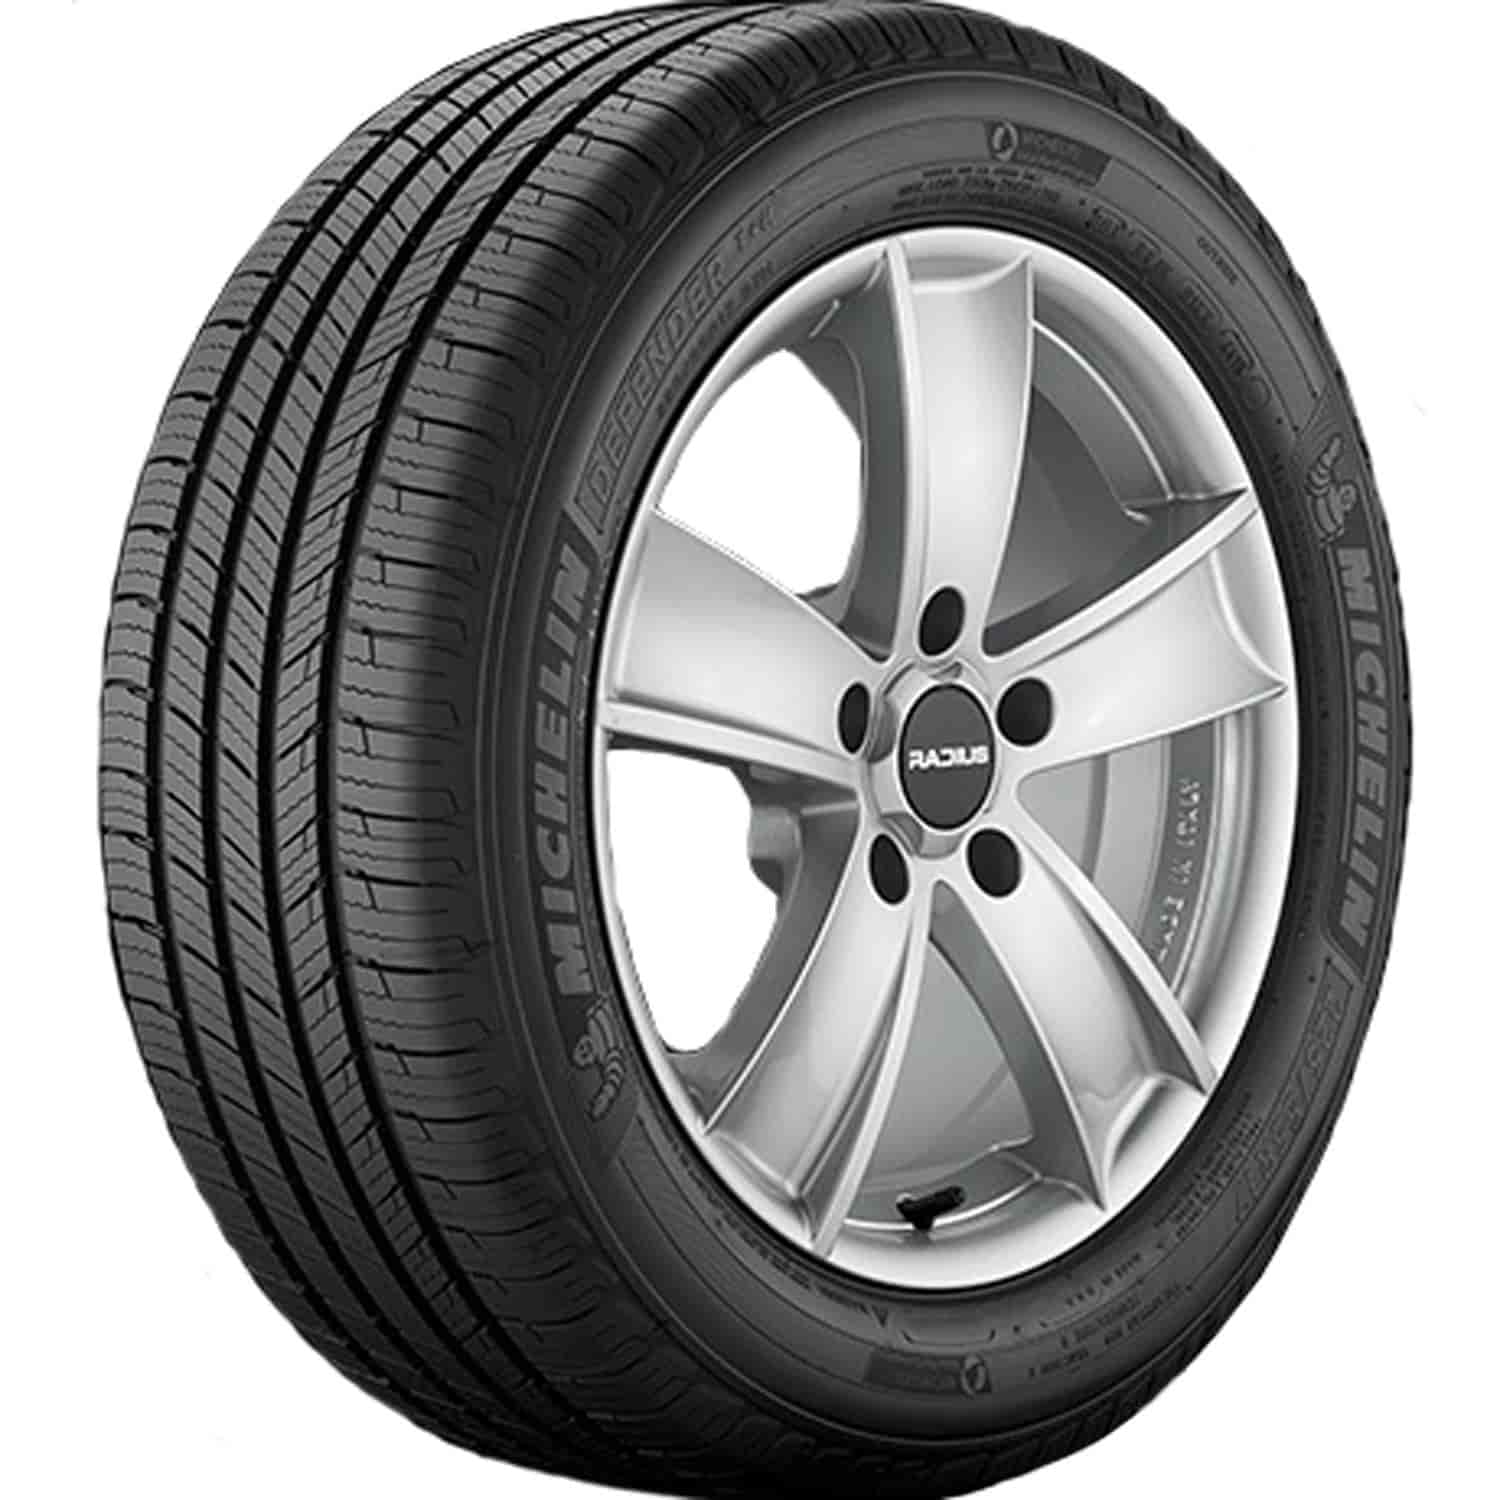 Defender T+H Tire Size:185/65R14